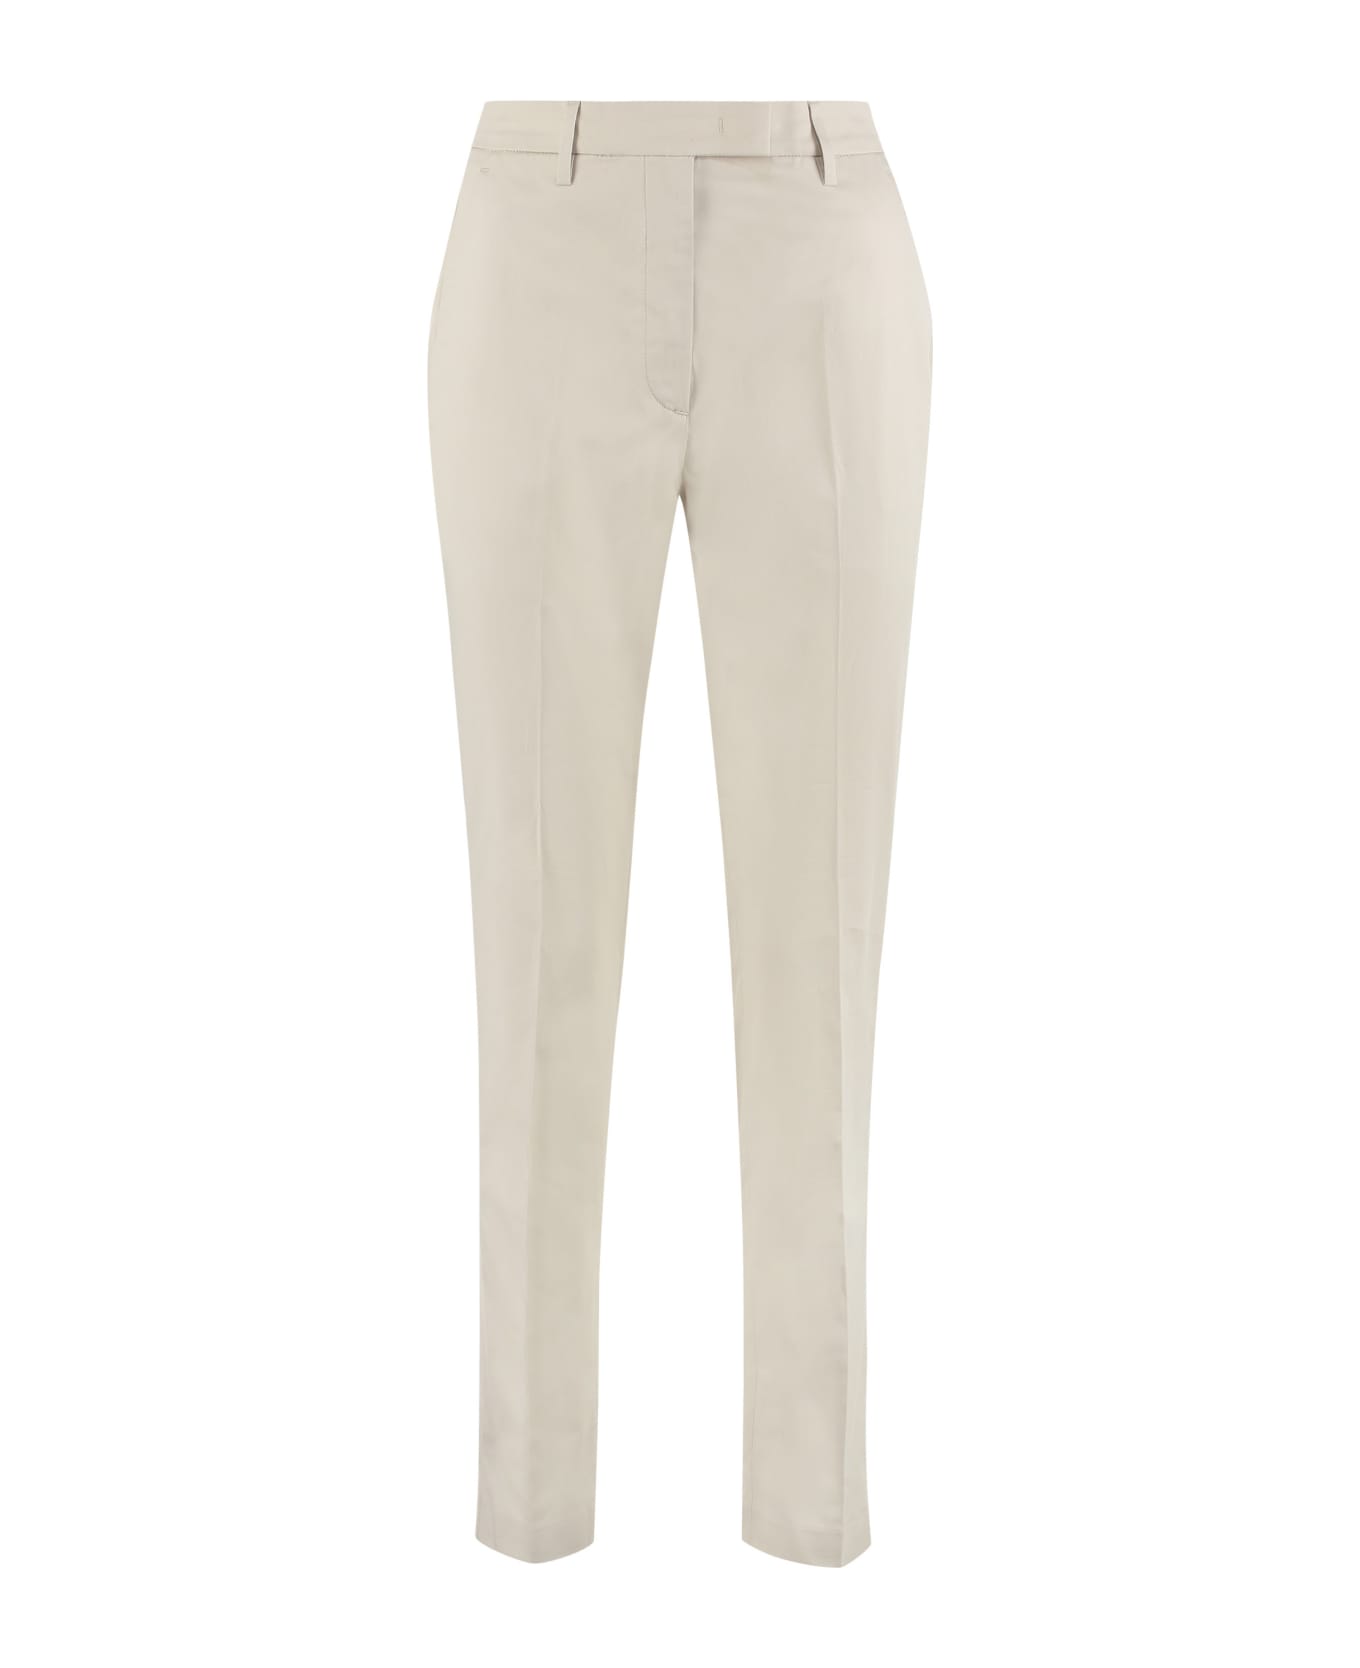 Department Five Stretch Cotton Trousers - Beige